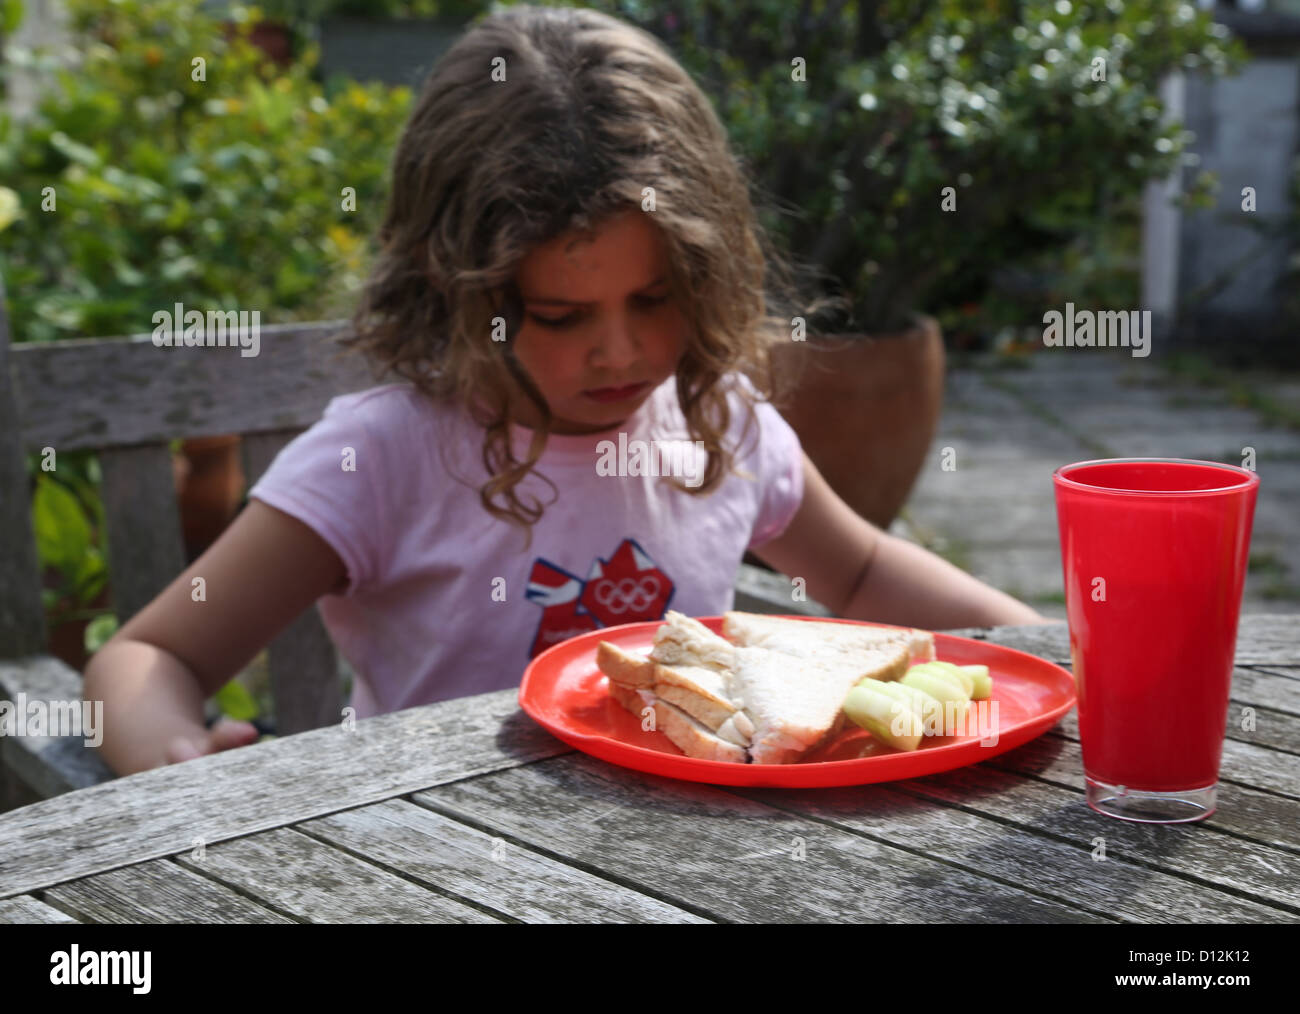 6 Year Old Girl Looking Down Refusing To Eat Her Lunch Surrey England Stock Photo